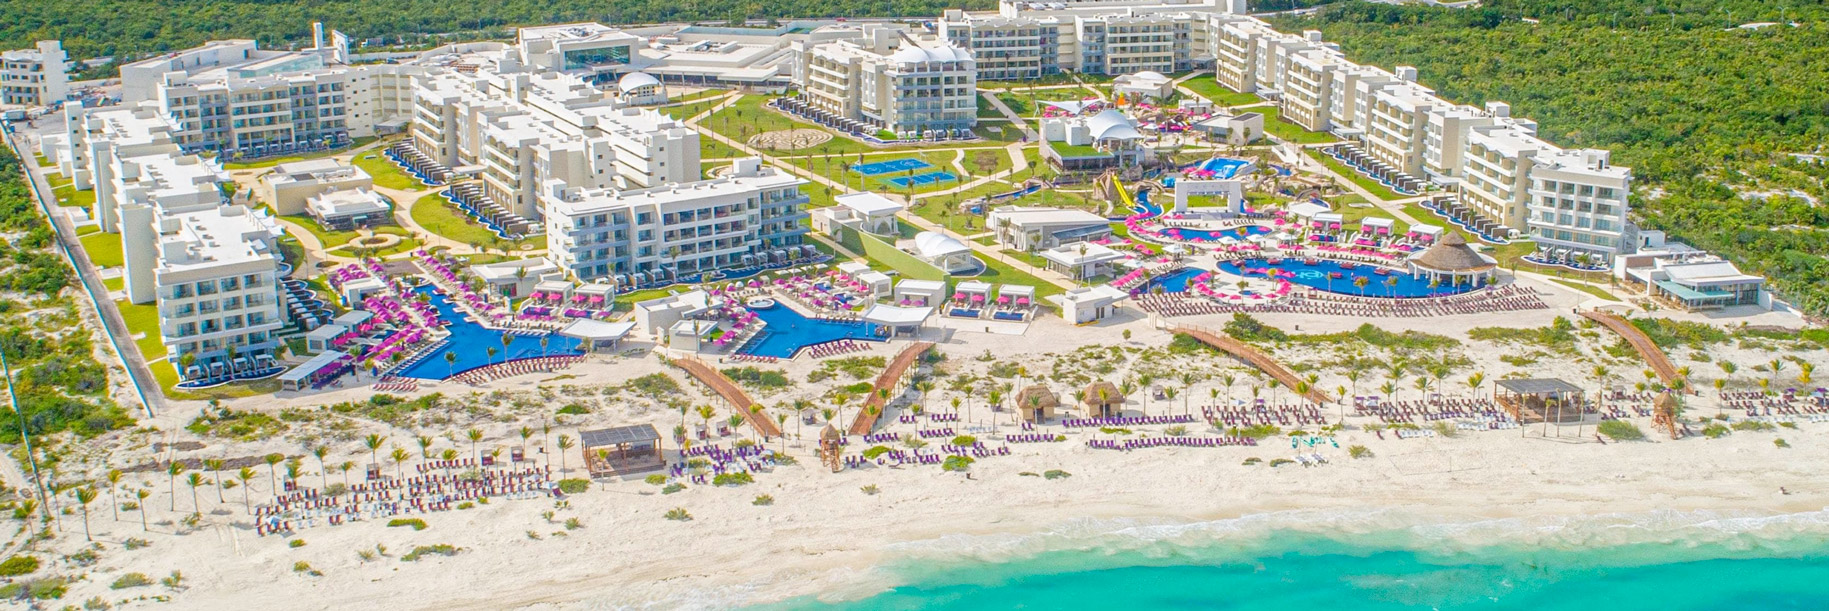 Planet Hollywood Cancun all-inclusive resort